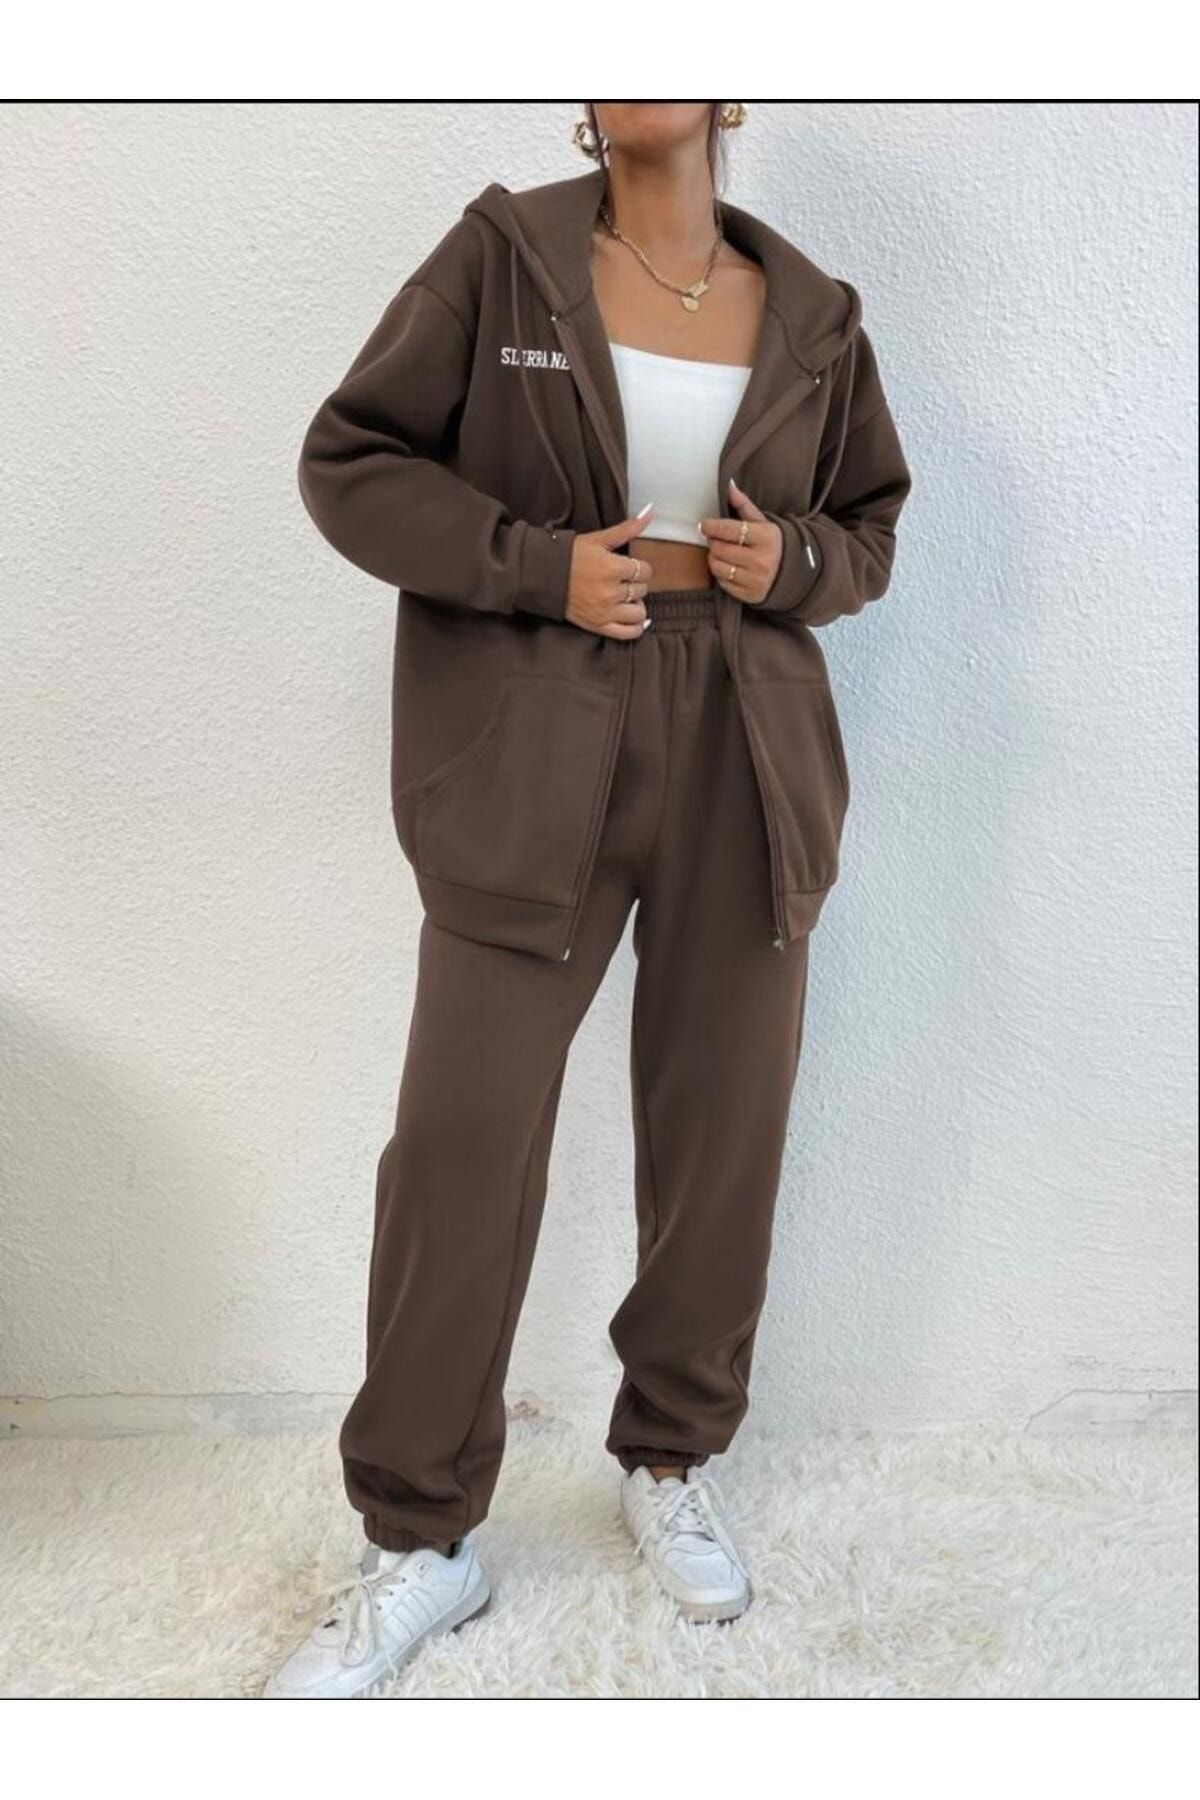 Niuer Women Tracksuit Sets Long Sleeve Jogger Set Hoodies 3 Pieces Outfit  Beam Foot Sweatsuits Solid Color Hooded Cardigan Tank And Sweatpants Lake  Blue XL 